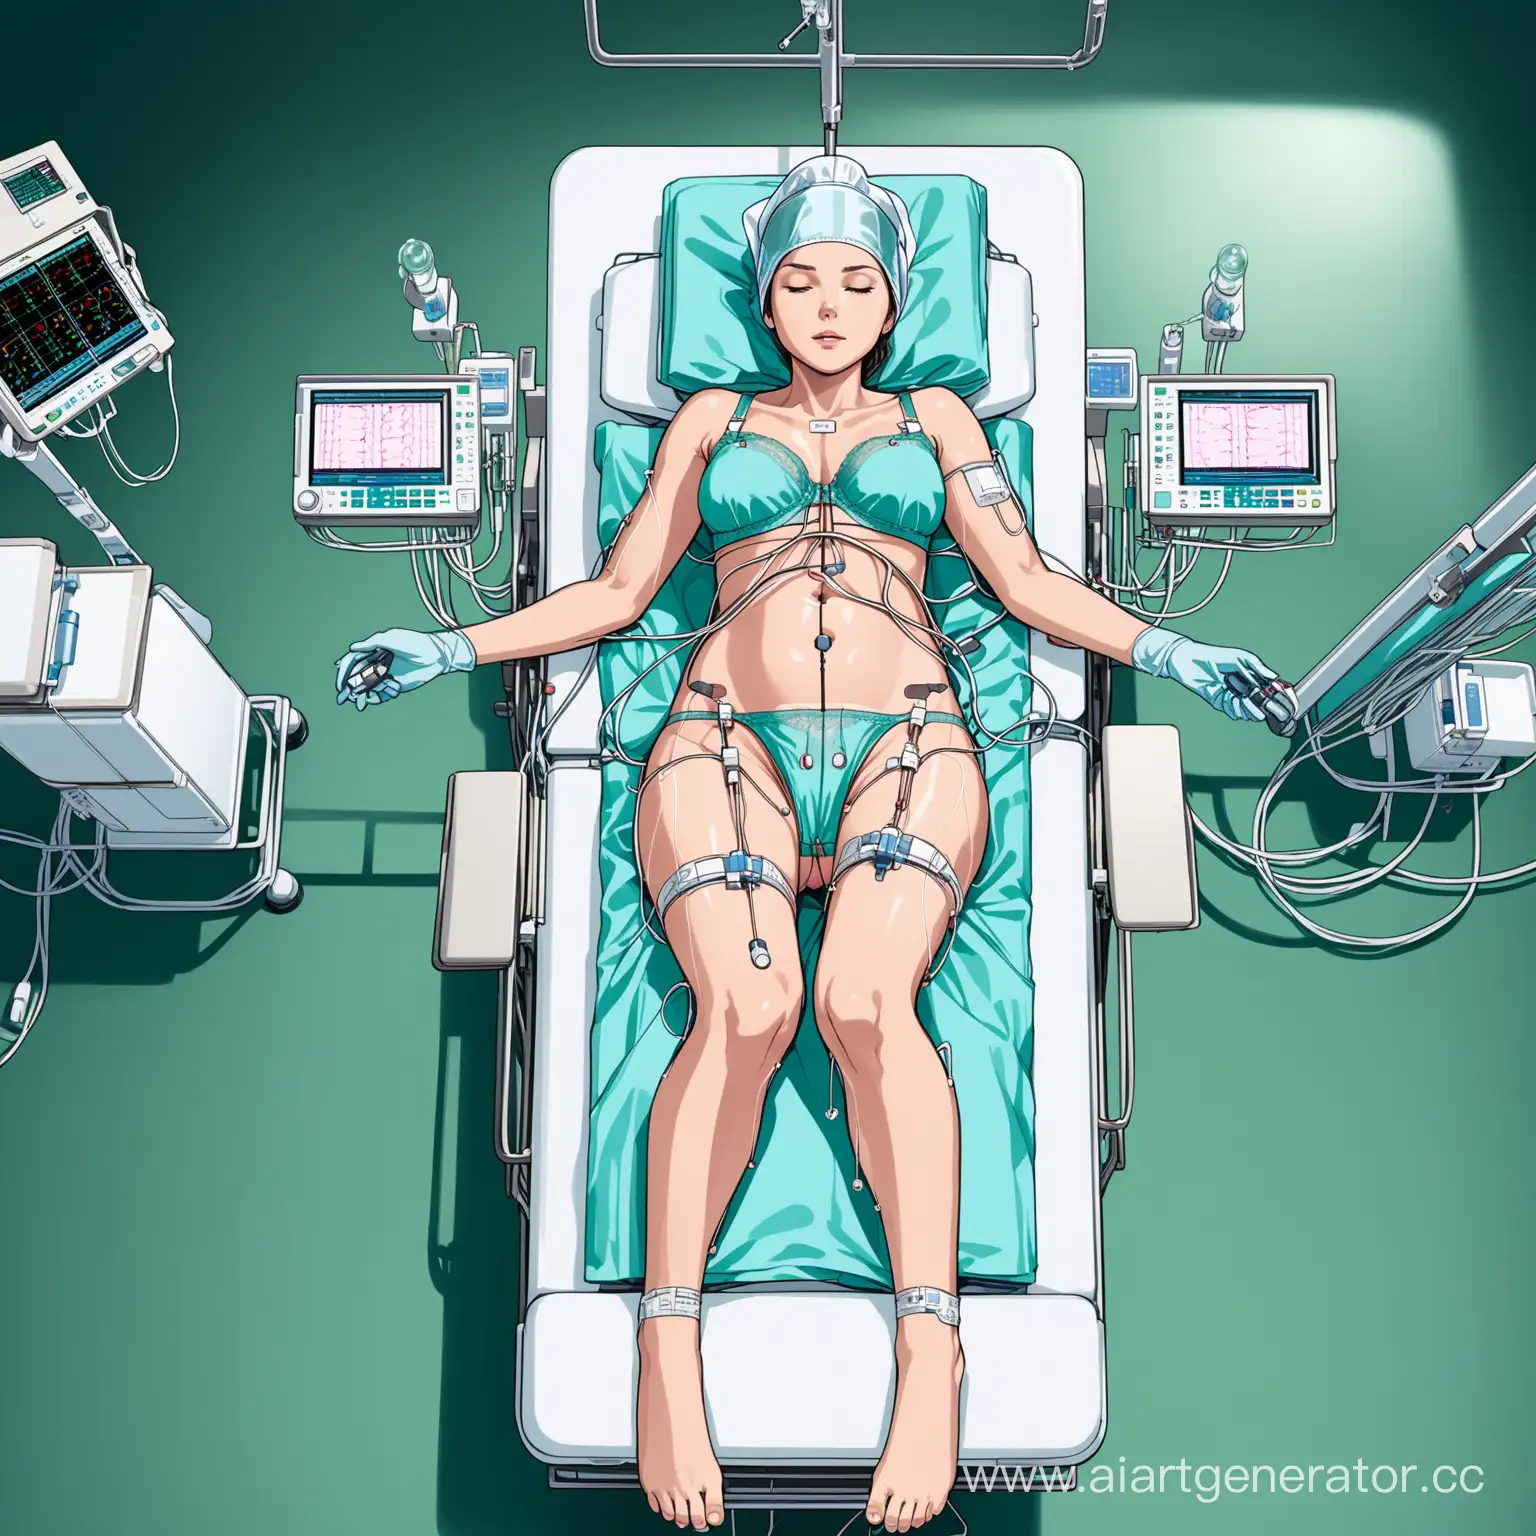 legs spread apart,operating room, exam chair,female patient,bra and panties,surgery prep,wearing EKG electrodes on her chest,laying in intensive care,wearing medical equipment,urinary tubes,top view,full body view